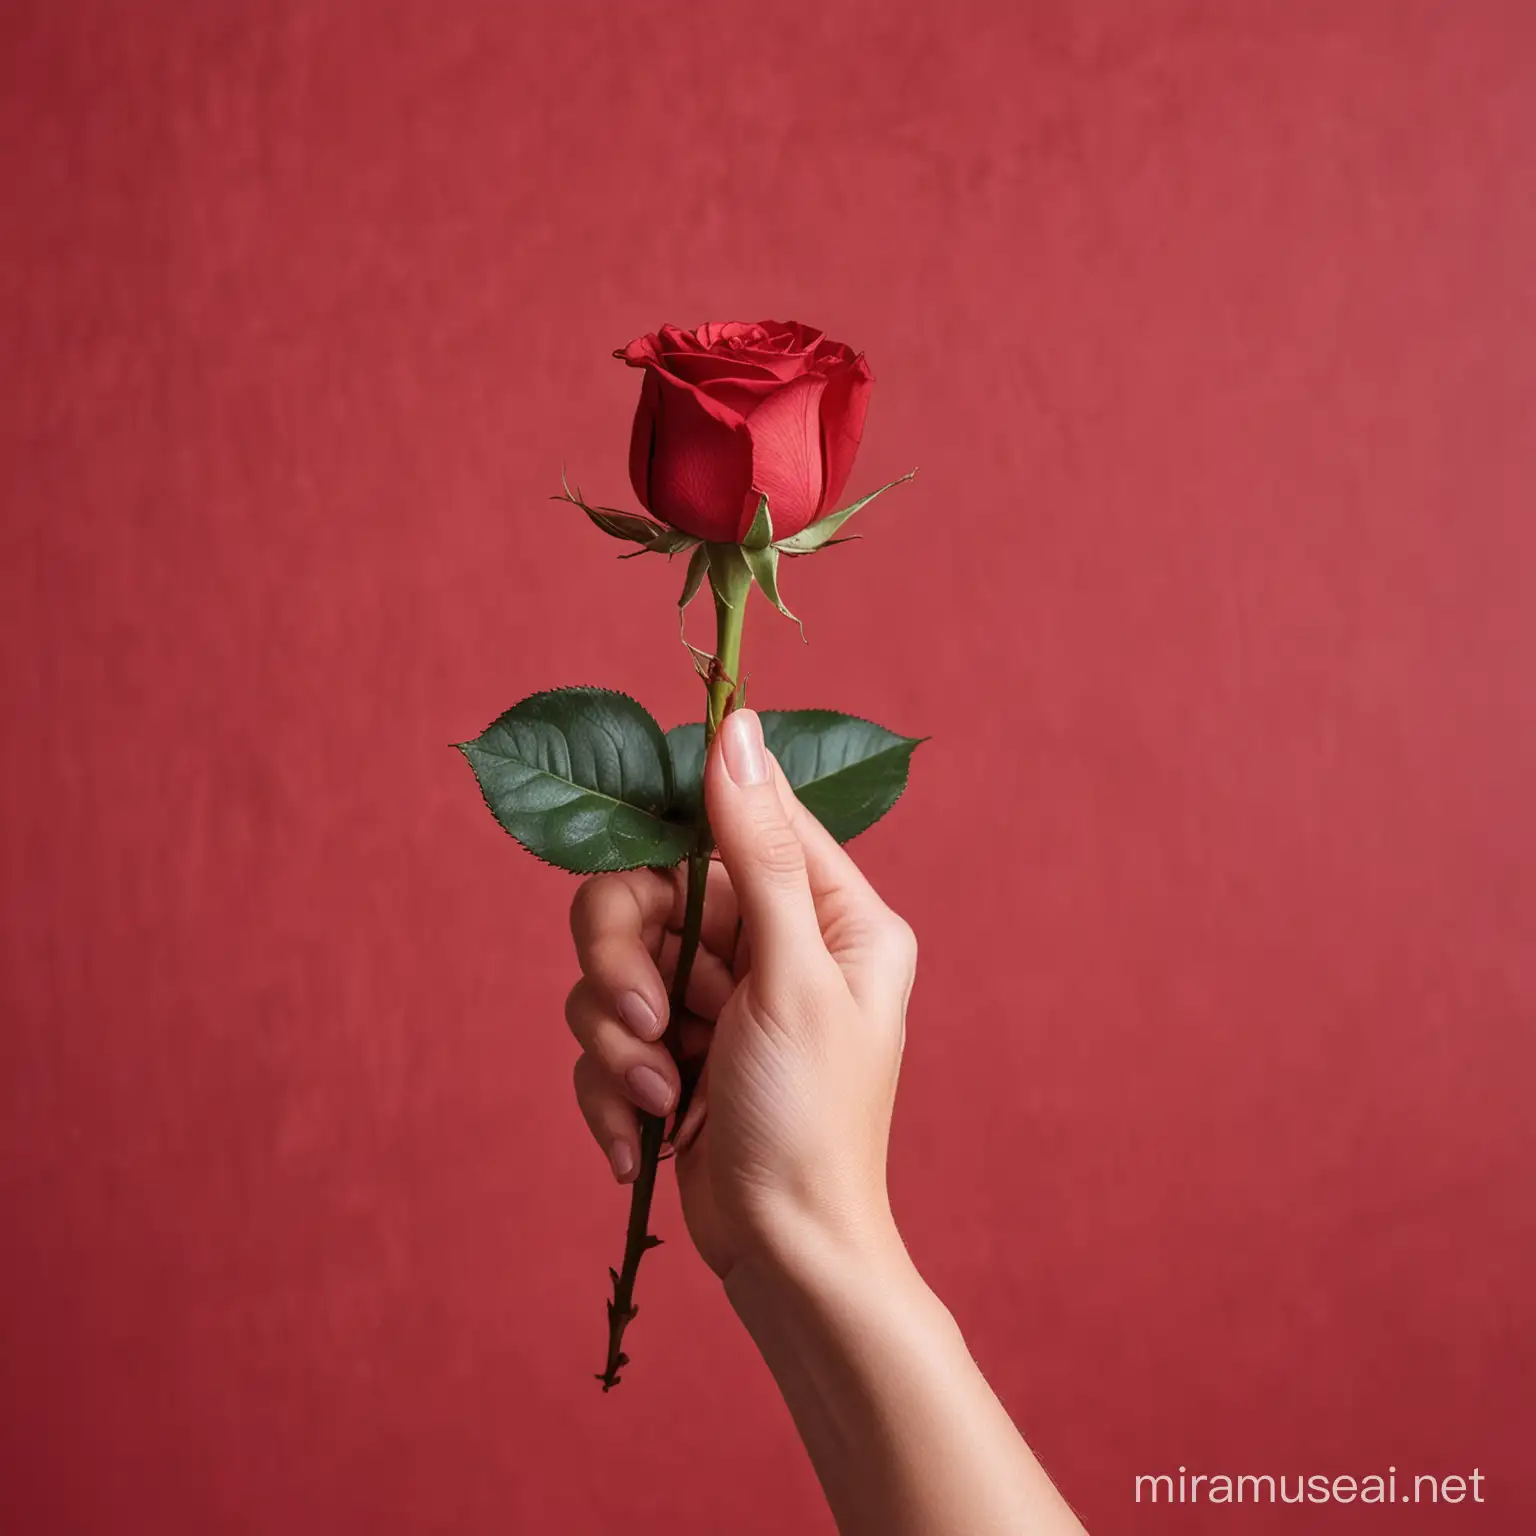 Womans Hand Holding Rose on Red Background